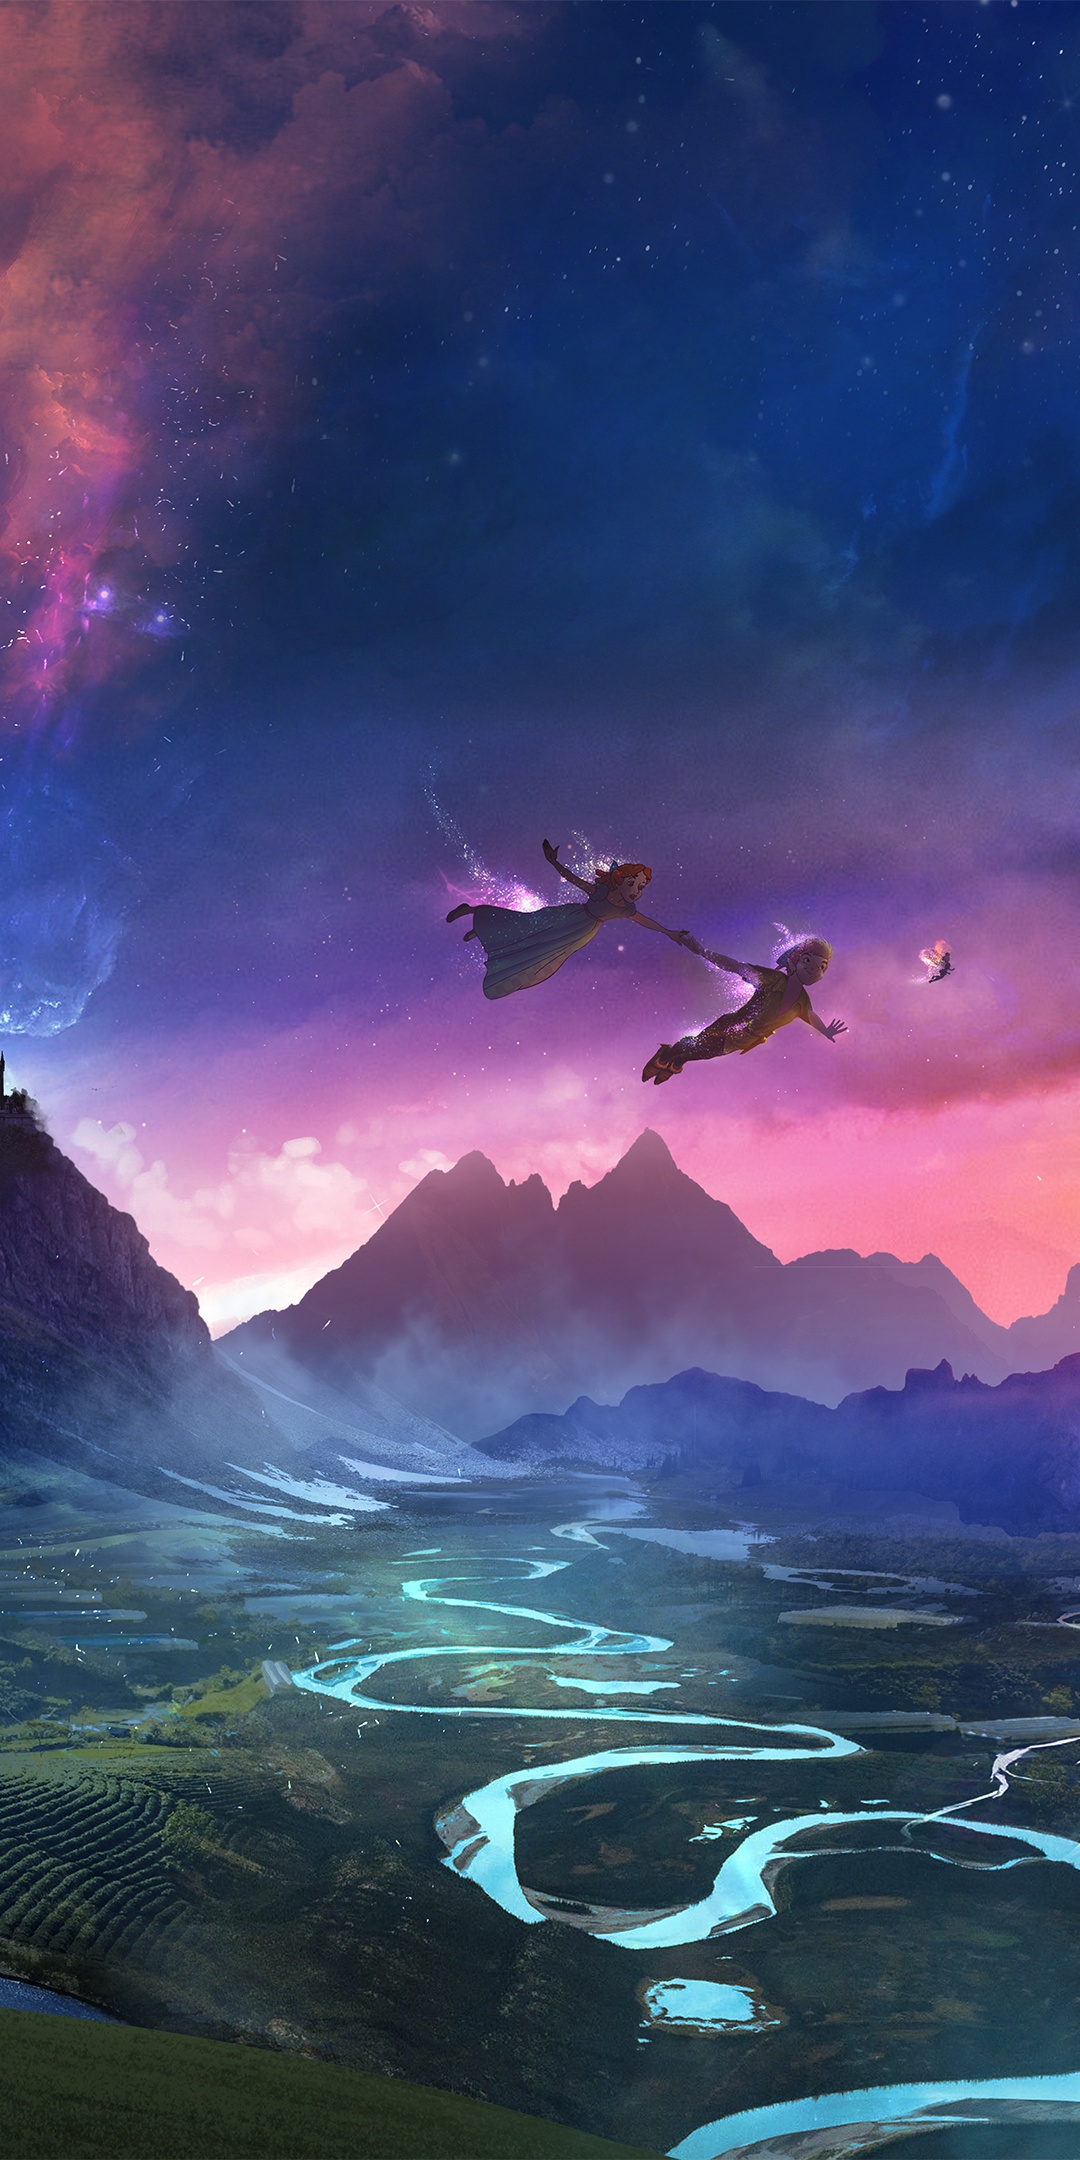 Dream 4K Wallpaper, Flying together, Mountains, Evening, Dusk, Boy and